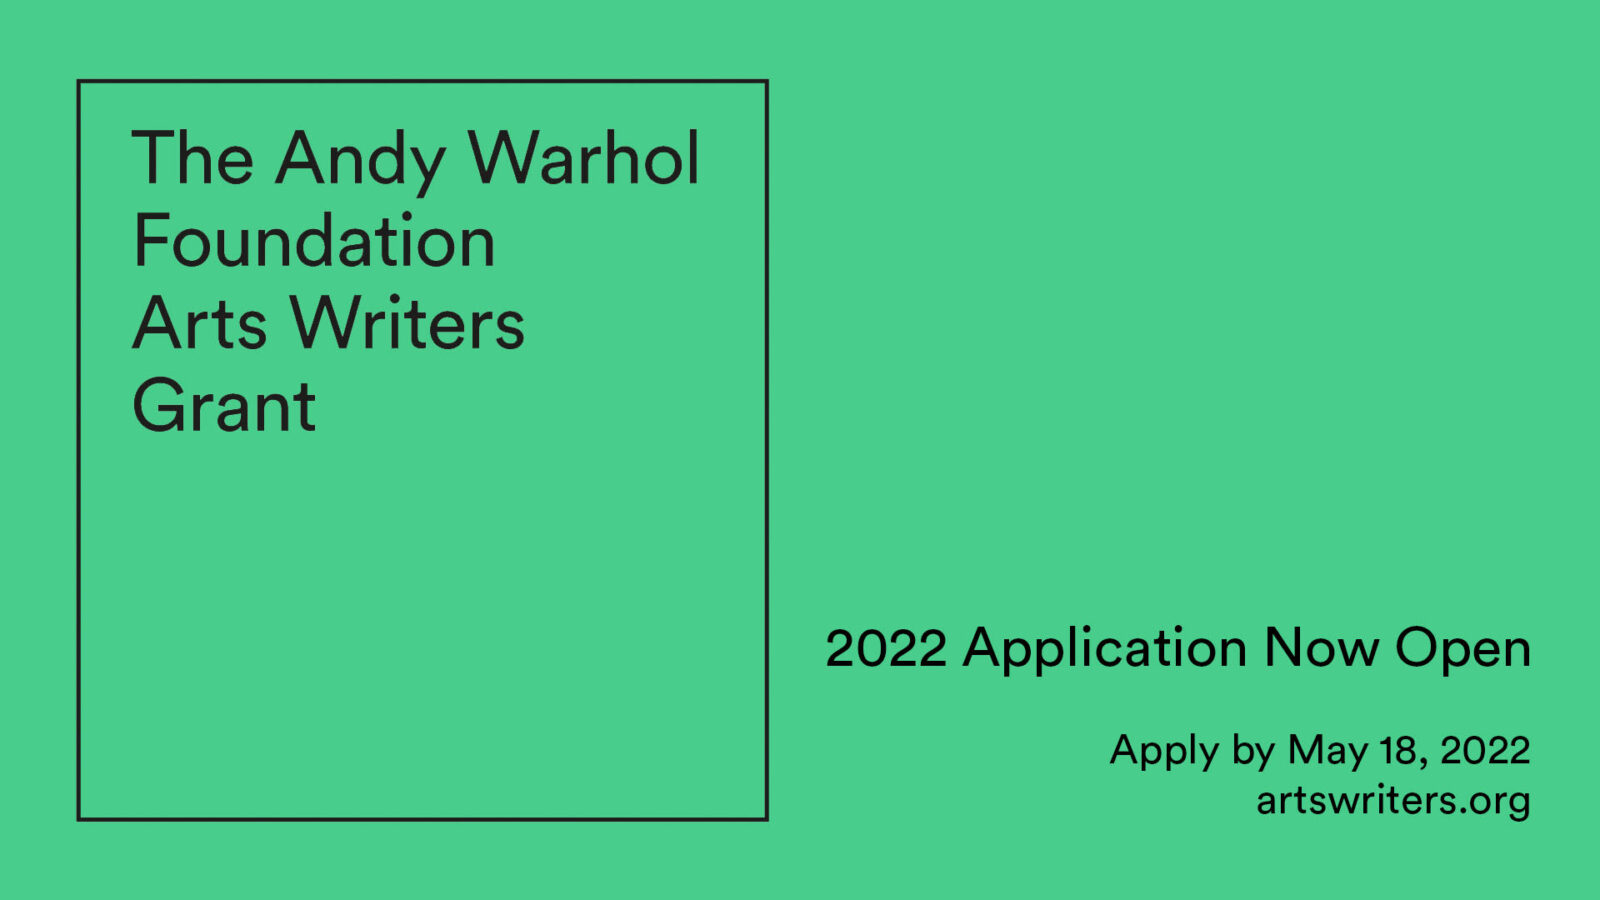 The Andy Warhol Arts Writers Grant 2022 Application Open